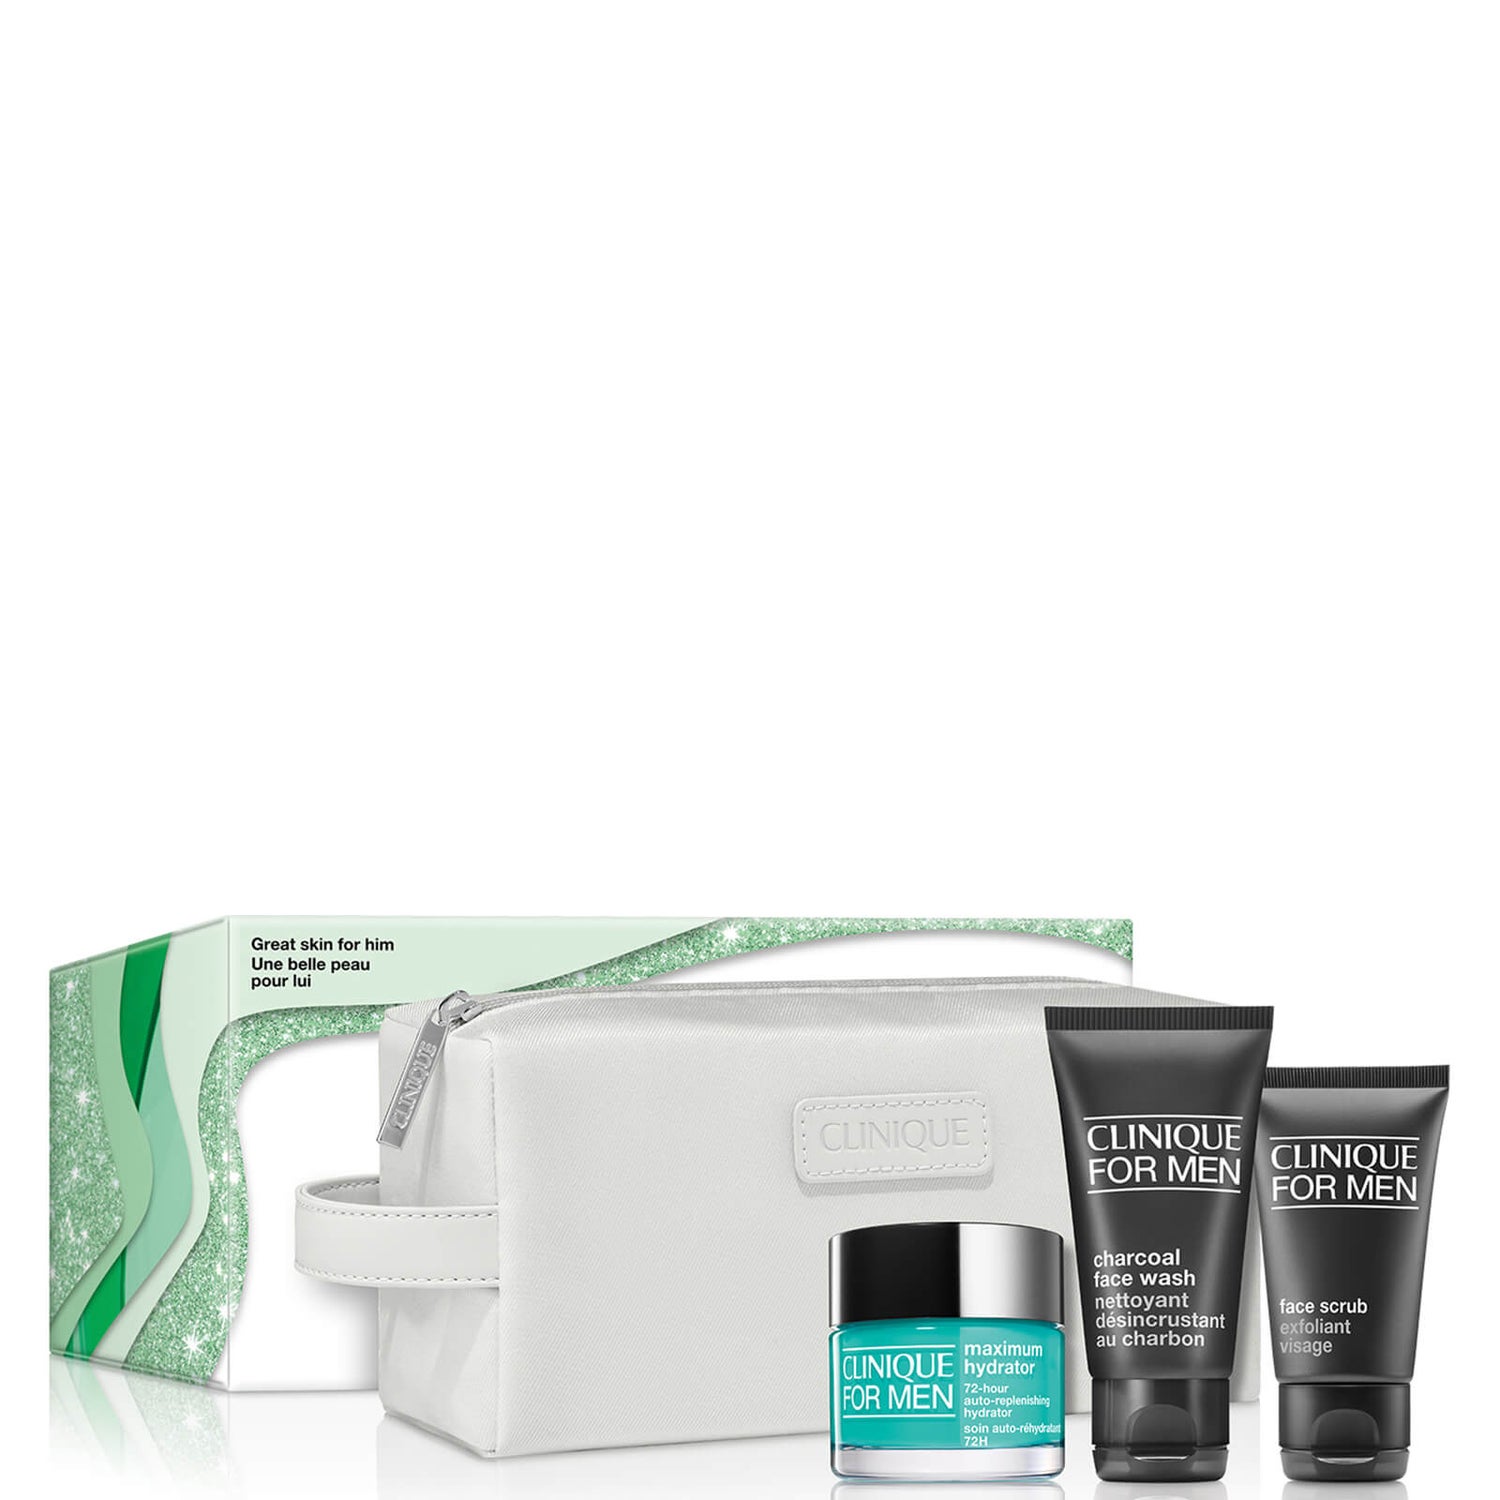 Clinique Great Skin for Him: Men's Skincare Gift Set (Worth £52.35)